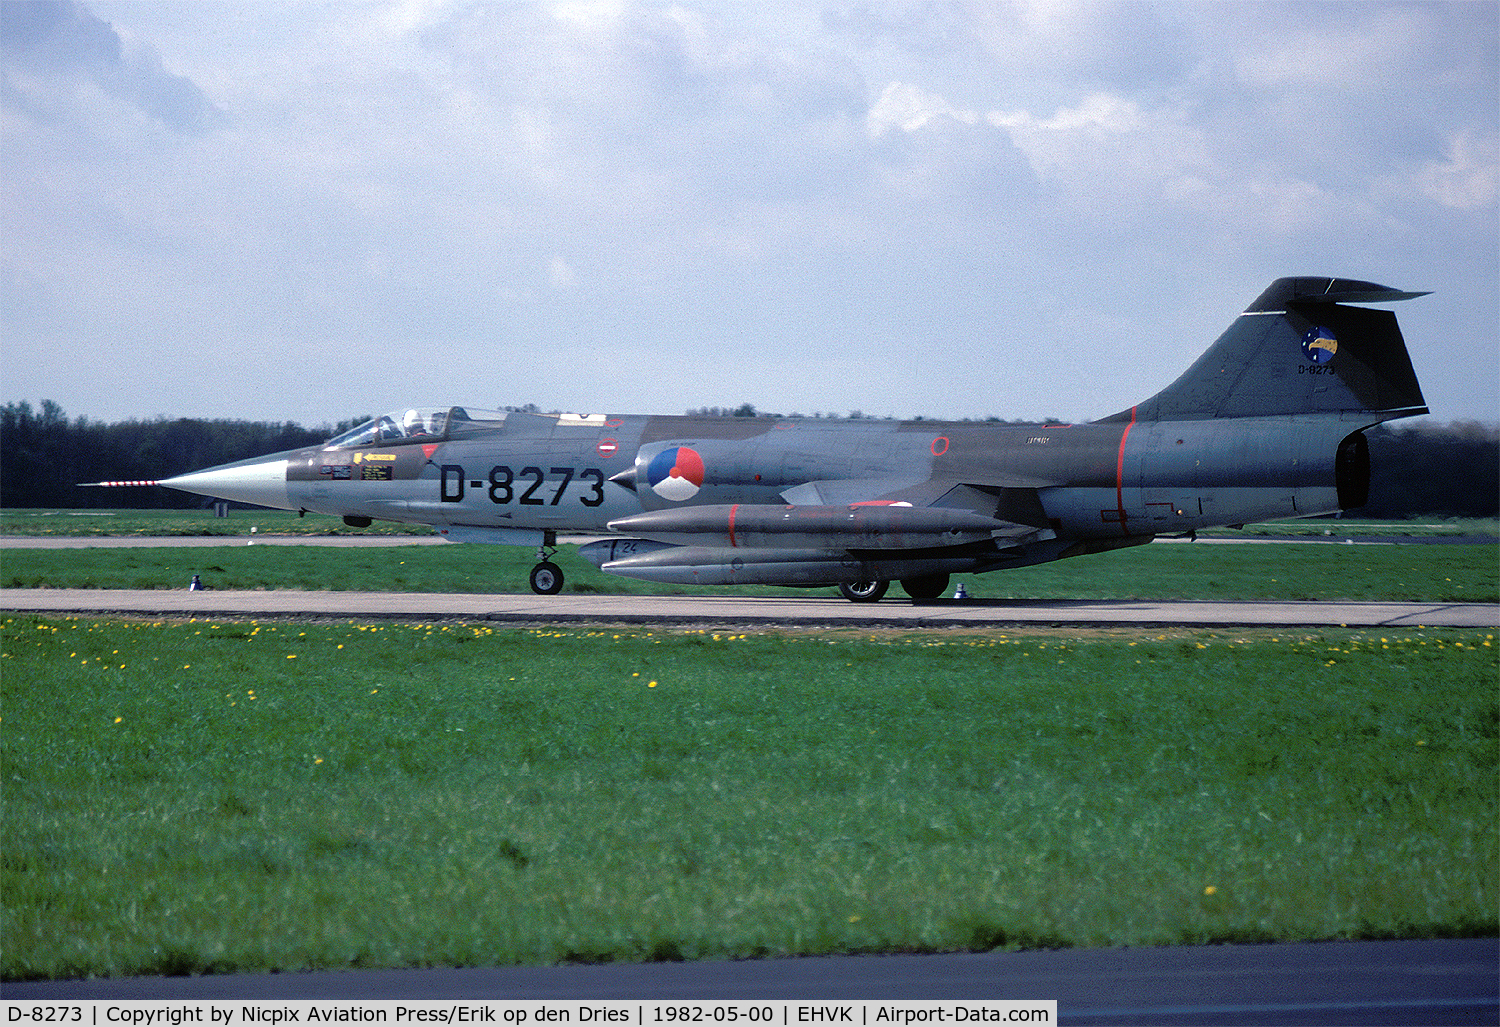 D-8273, Lockheed RF-104G Starfighter C/N 683-8273, D-8273 was assigned to 306 sqn and based at Volkel AB.